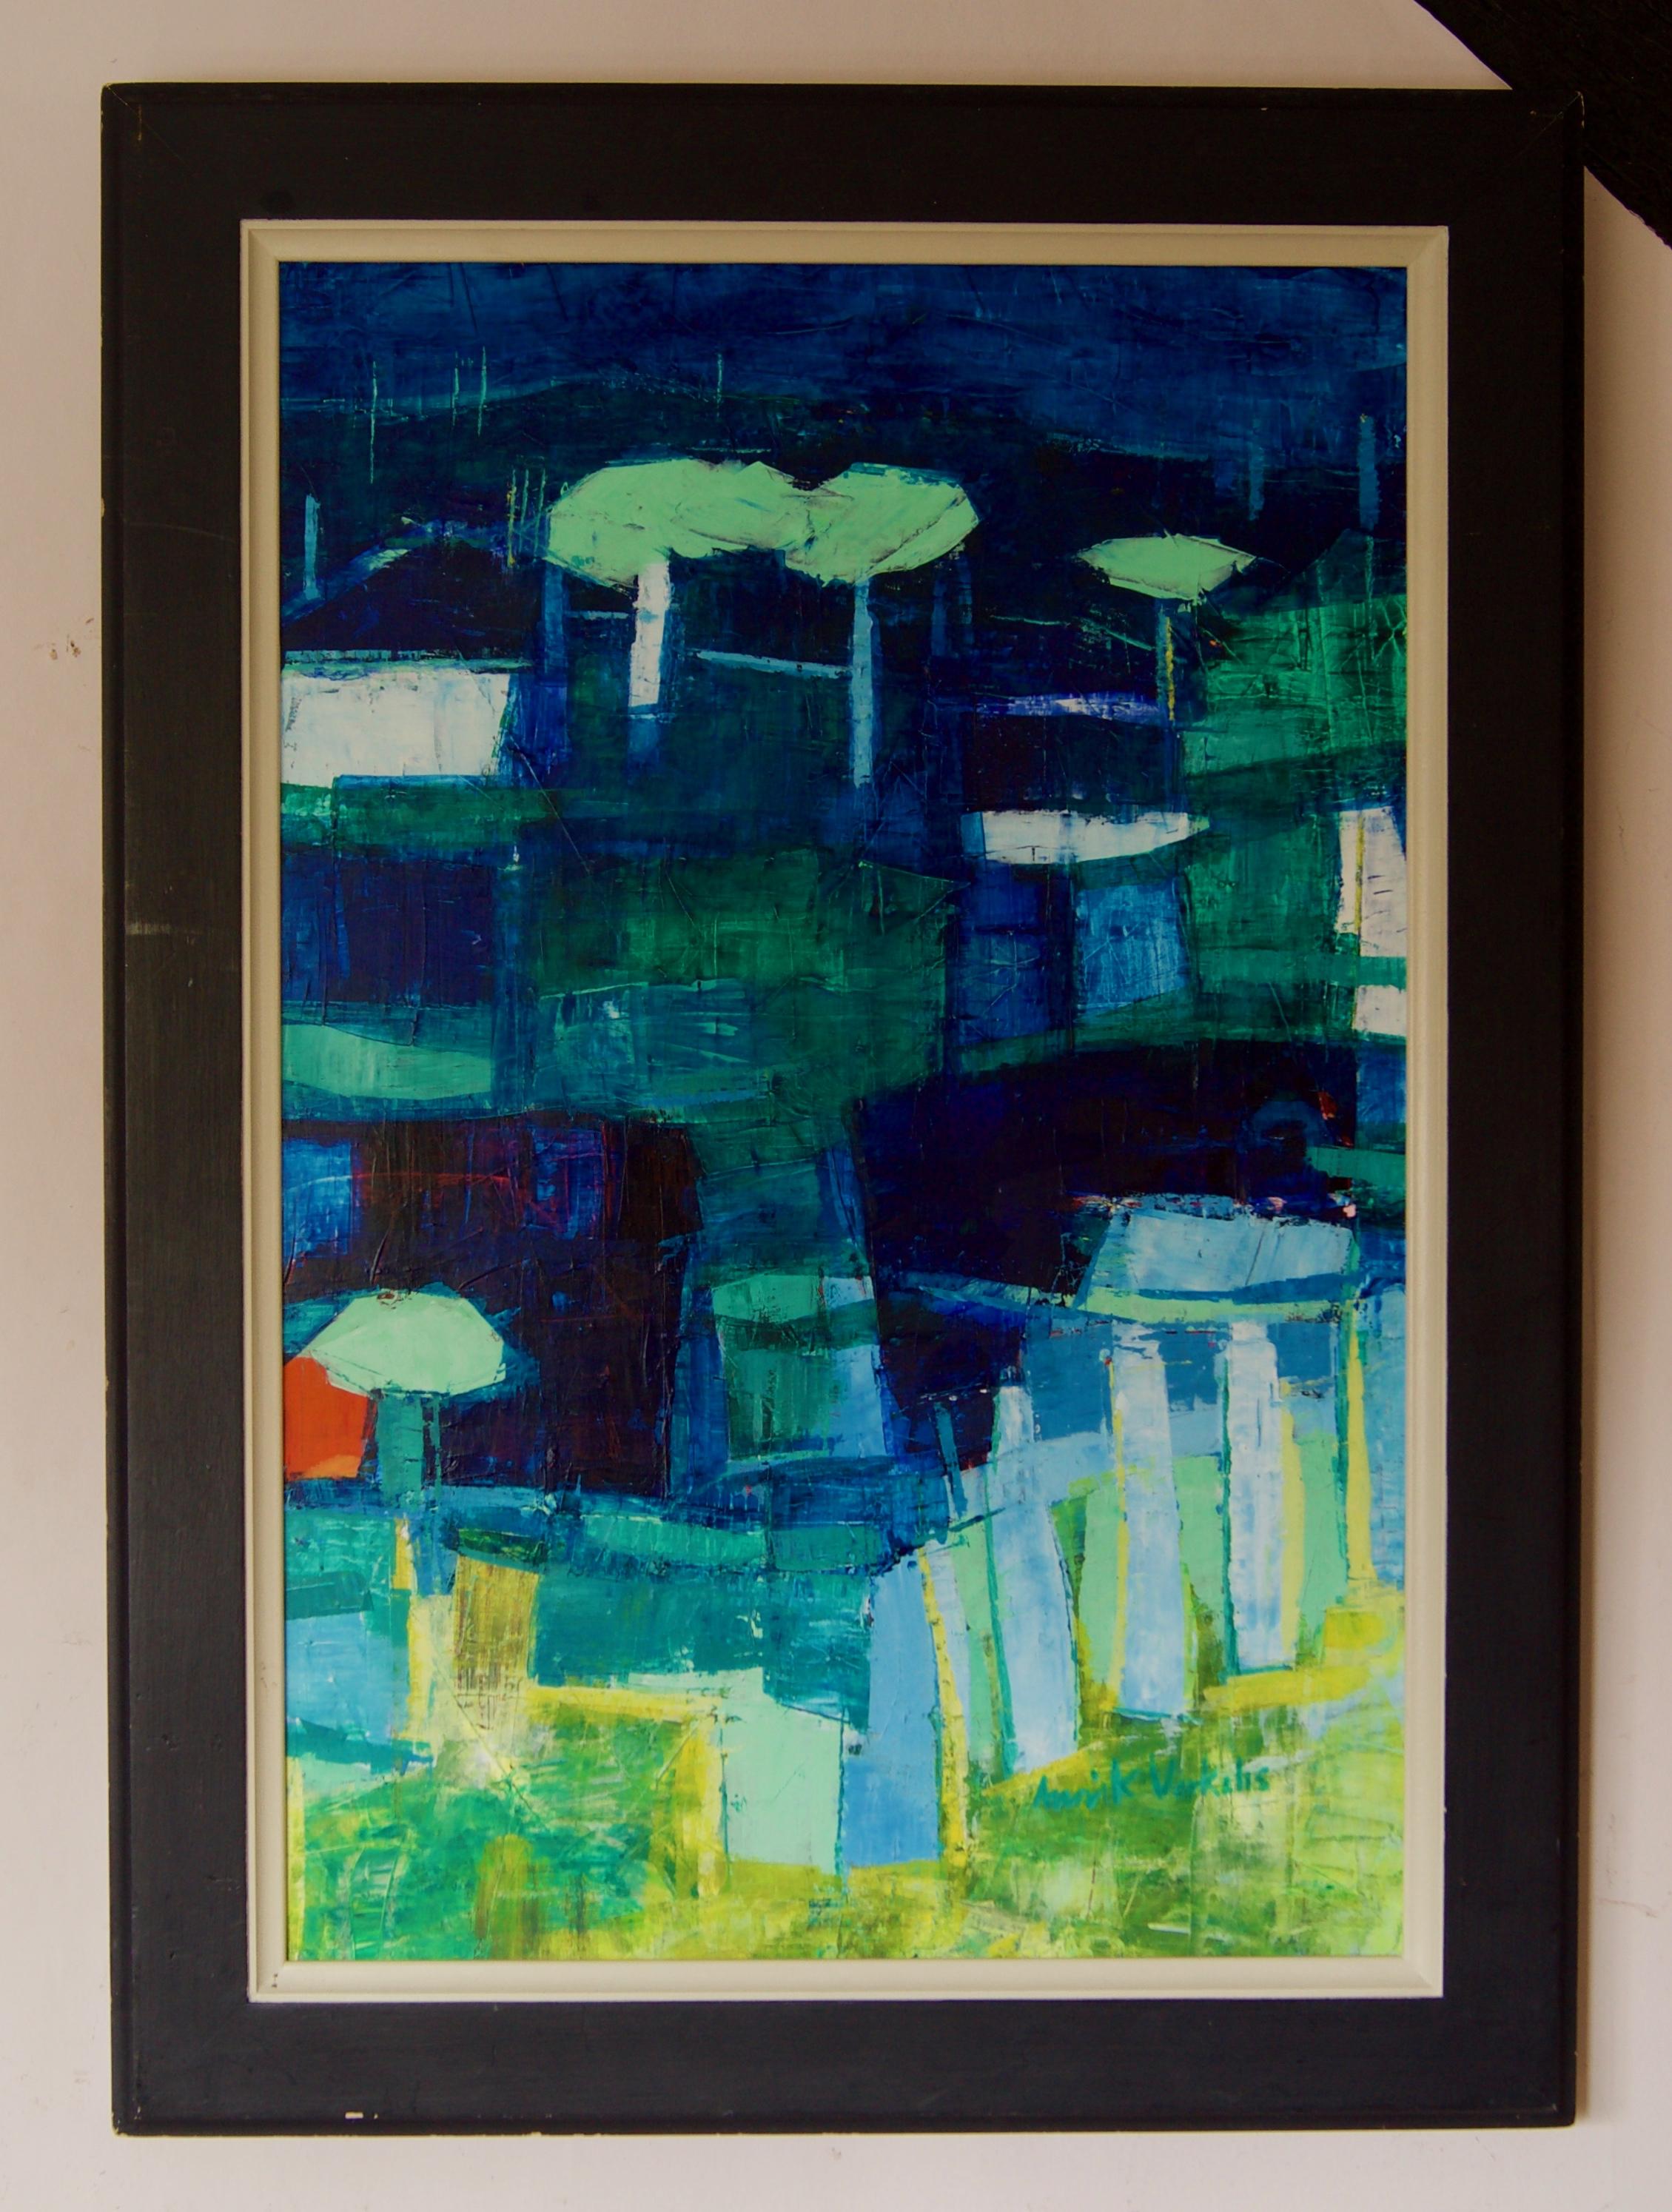 Abstract Landscape - Late 20th Century Acrylic Painting by Amrik Varkalis

Amrik Varkalis trained at The Manchester School of Art in the 1970's. She employs her complete understanding of colour and form, to create lush abstract landscapes and still